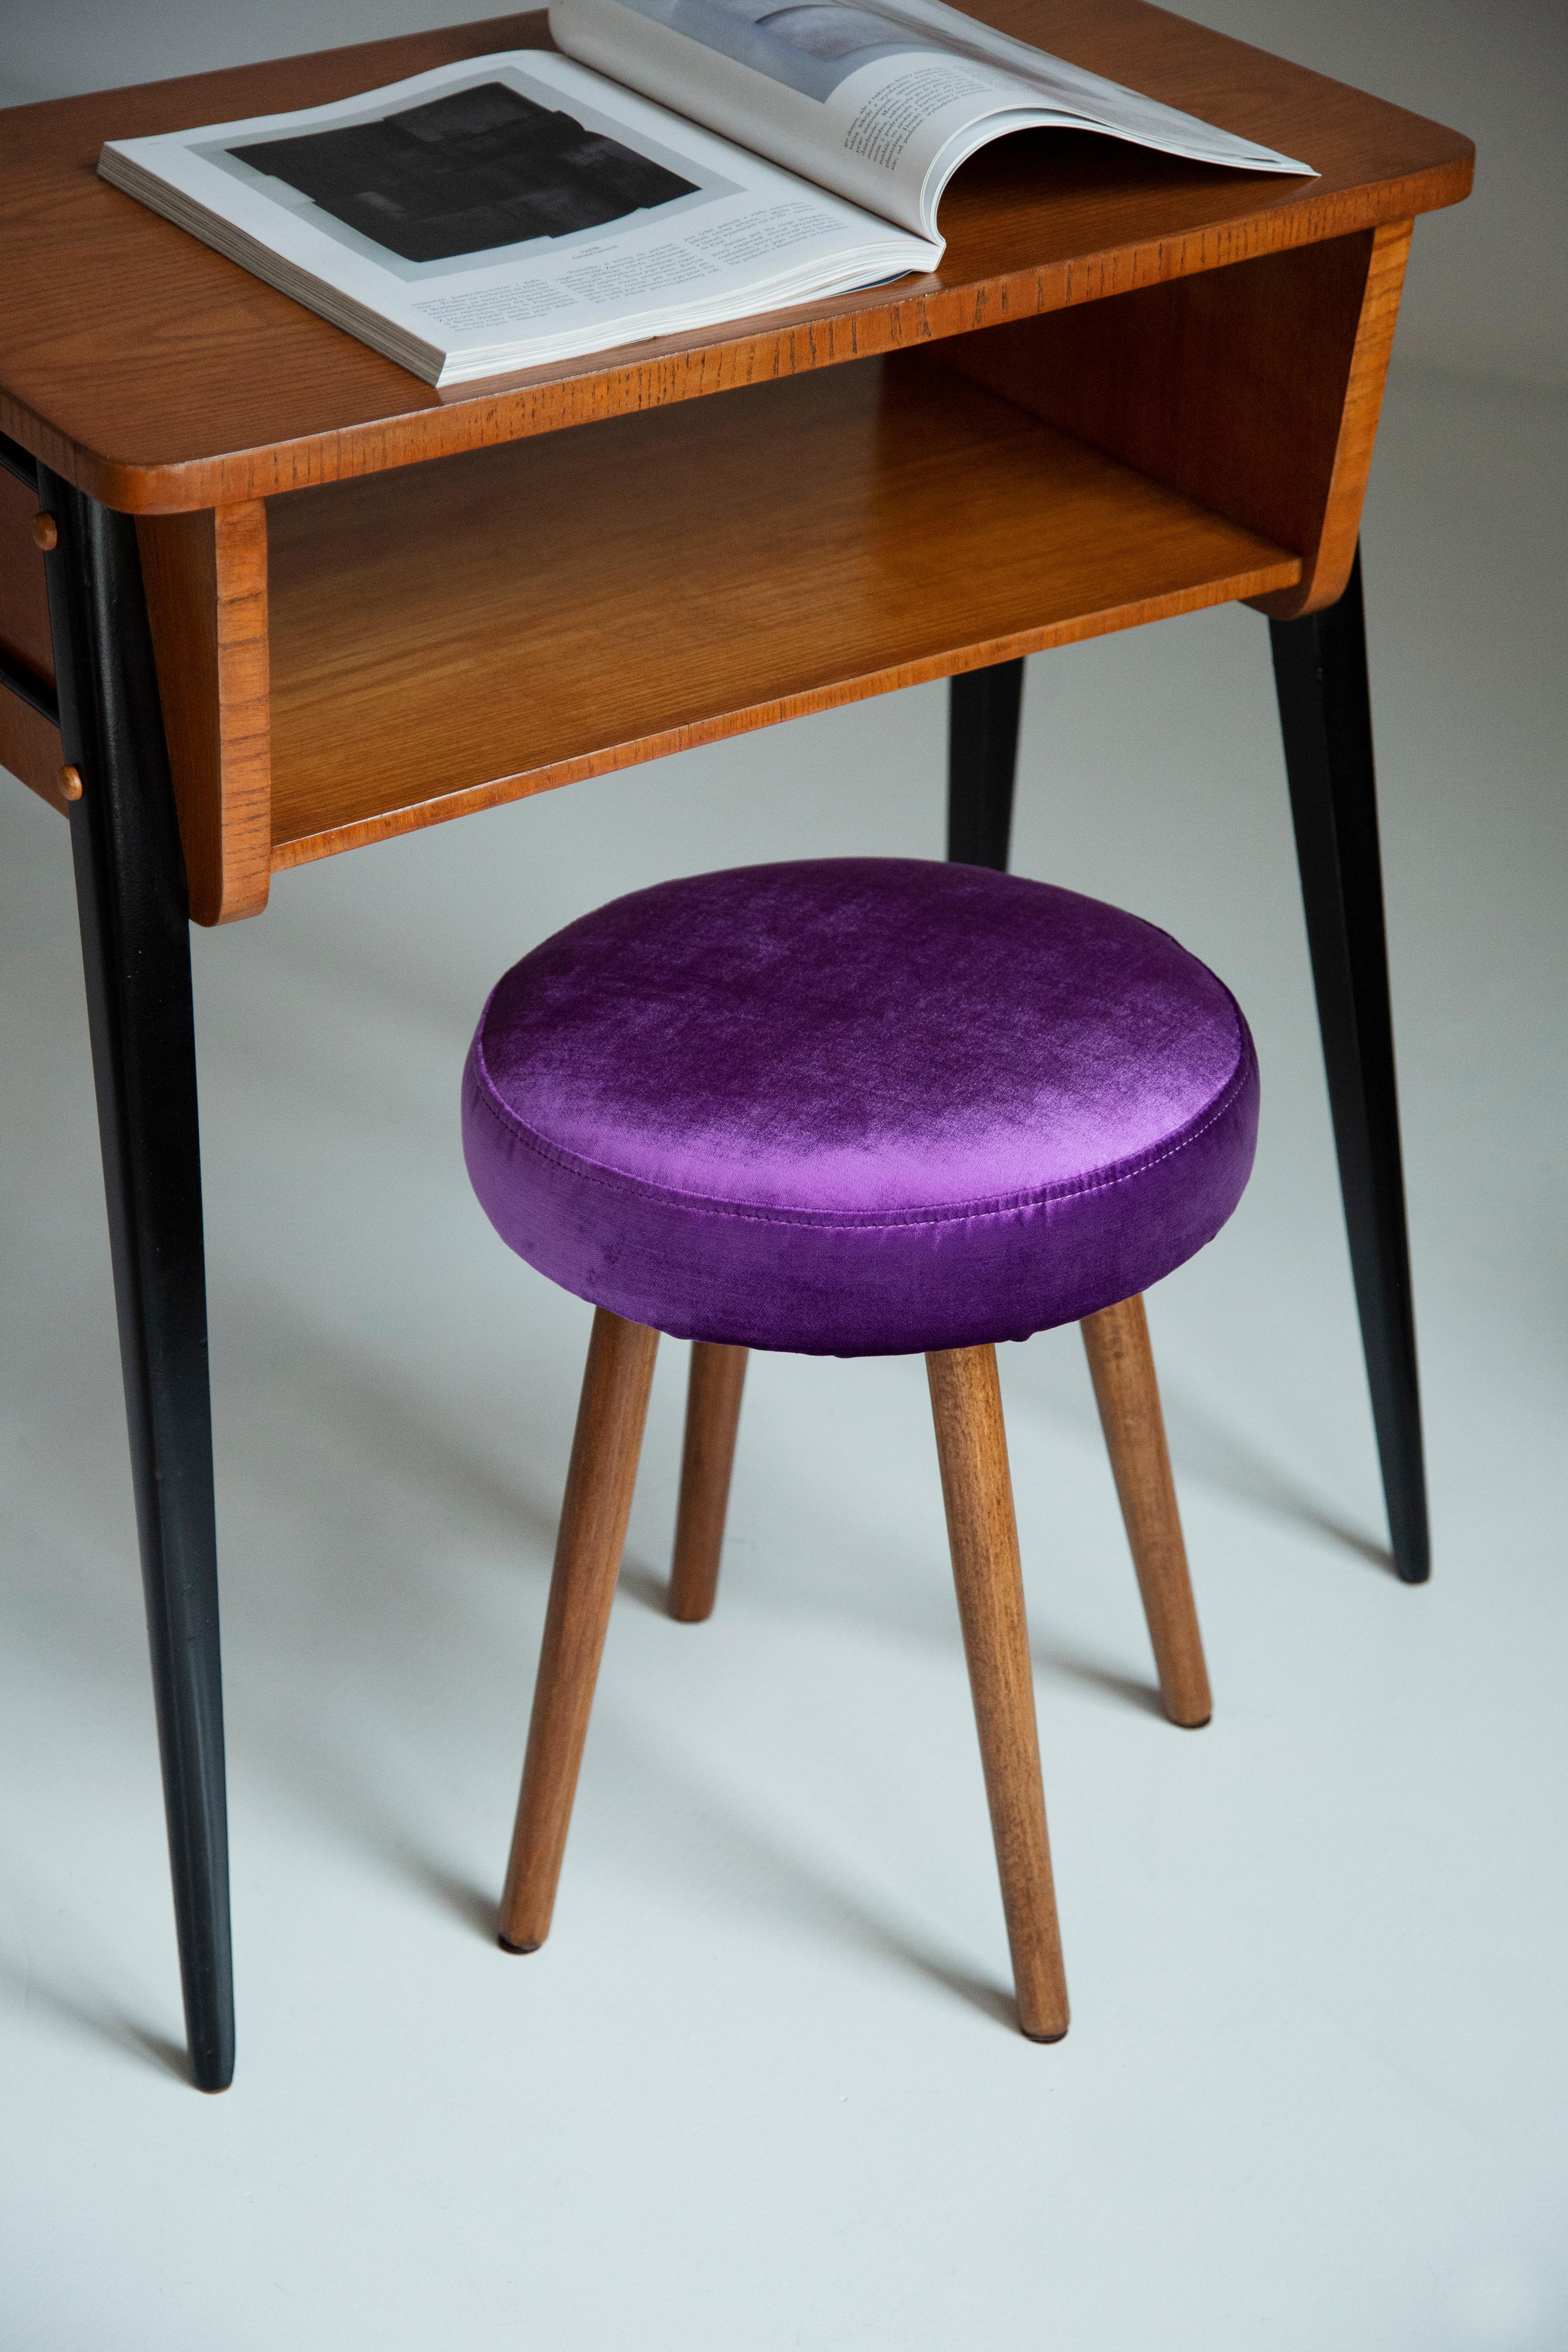 Stool from the turn of the 1960s and 1970s. Beautiful glossy purple color velvet upholstery. The stool consists of an upholstered part, a seat and wooden legs narrowing downwards, characteristic of the 1960s style. We can prepare this stool also in